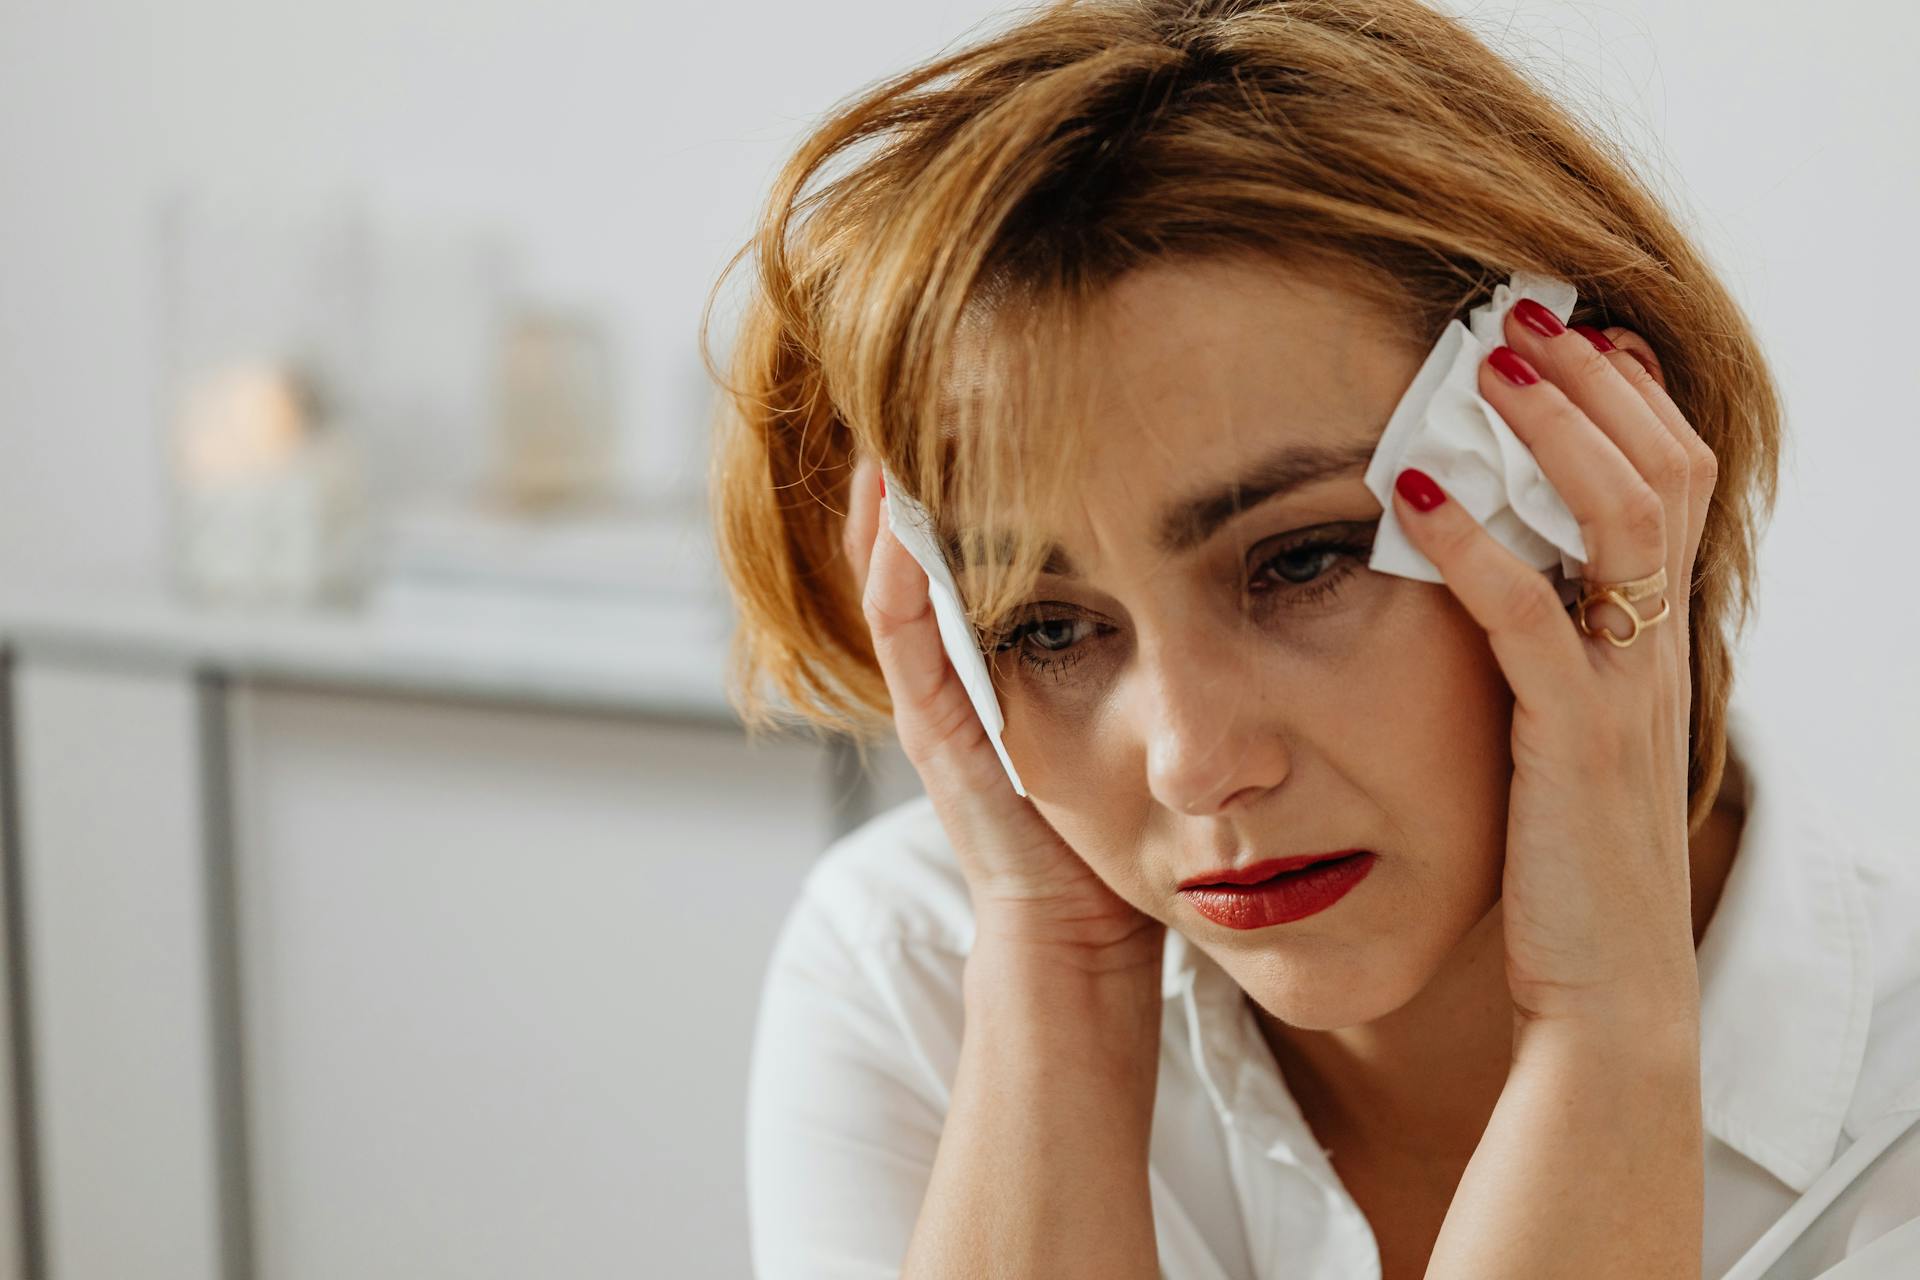 A frustrated woman in tears | Source: Pexels